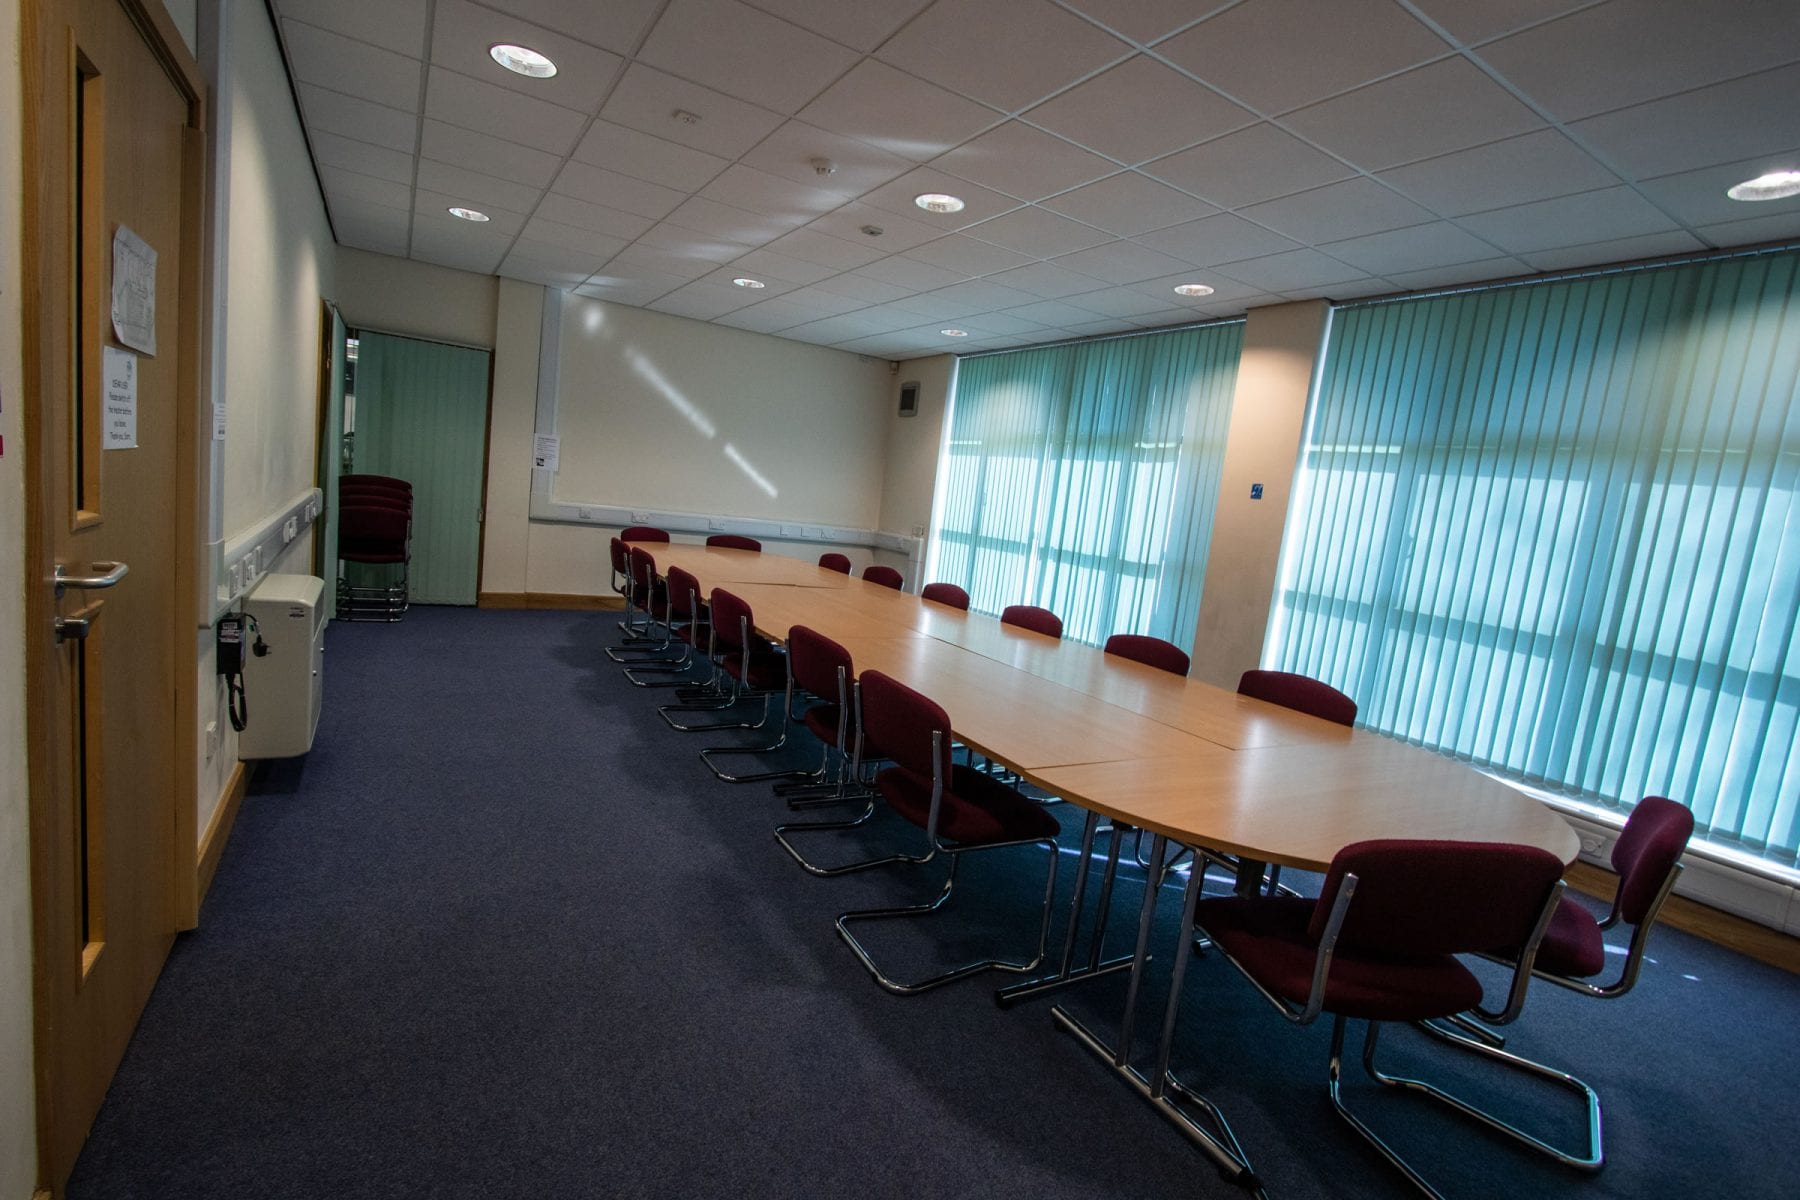 Room available for meetings and all groups